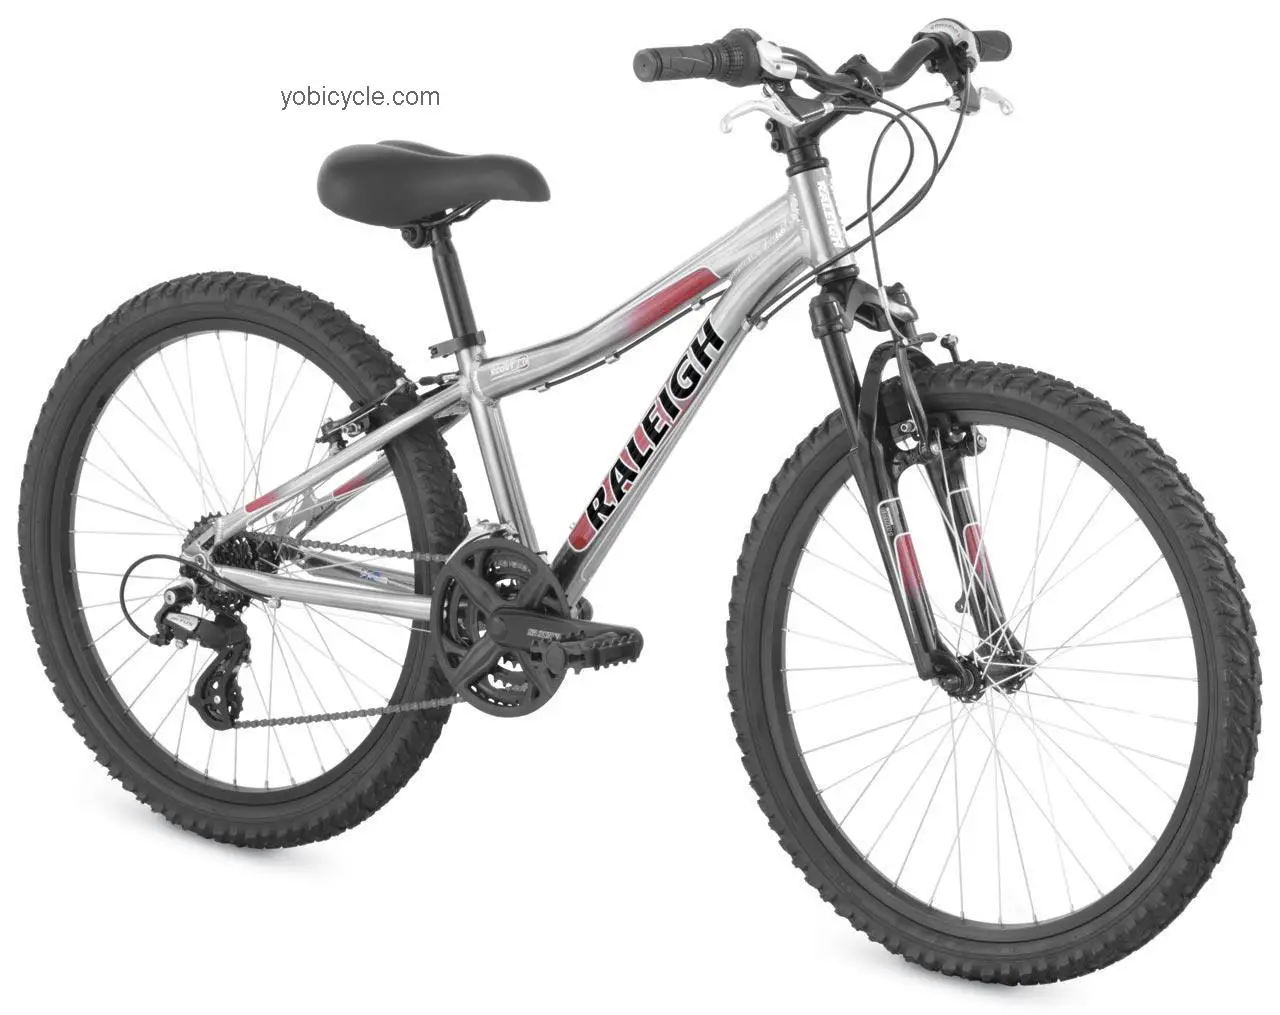 Raleigh Scout XC 2009 comparison online with competitors